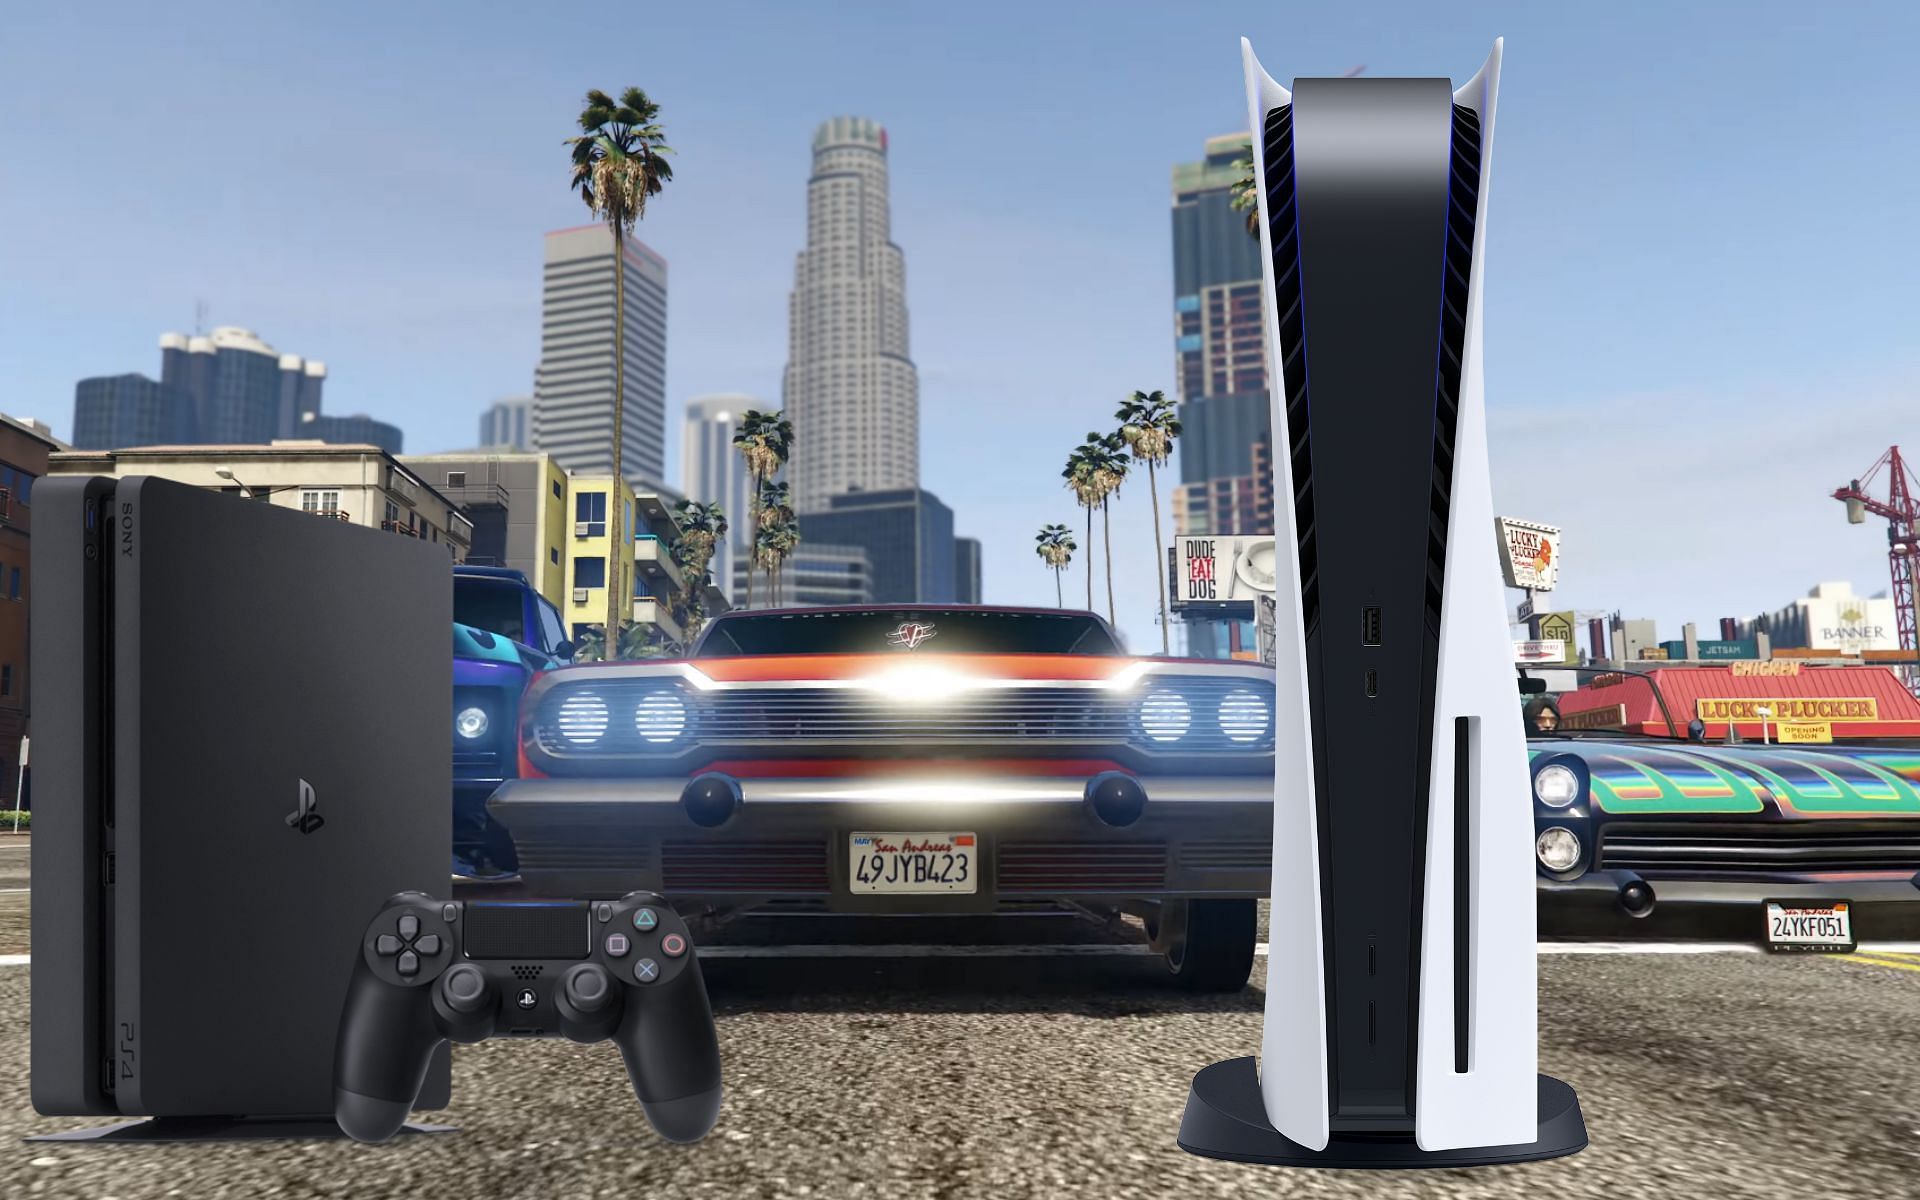 Can you play GTA Online on PS5 with players on PS4?